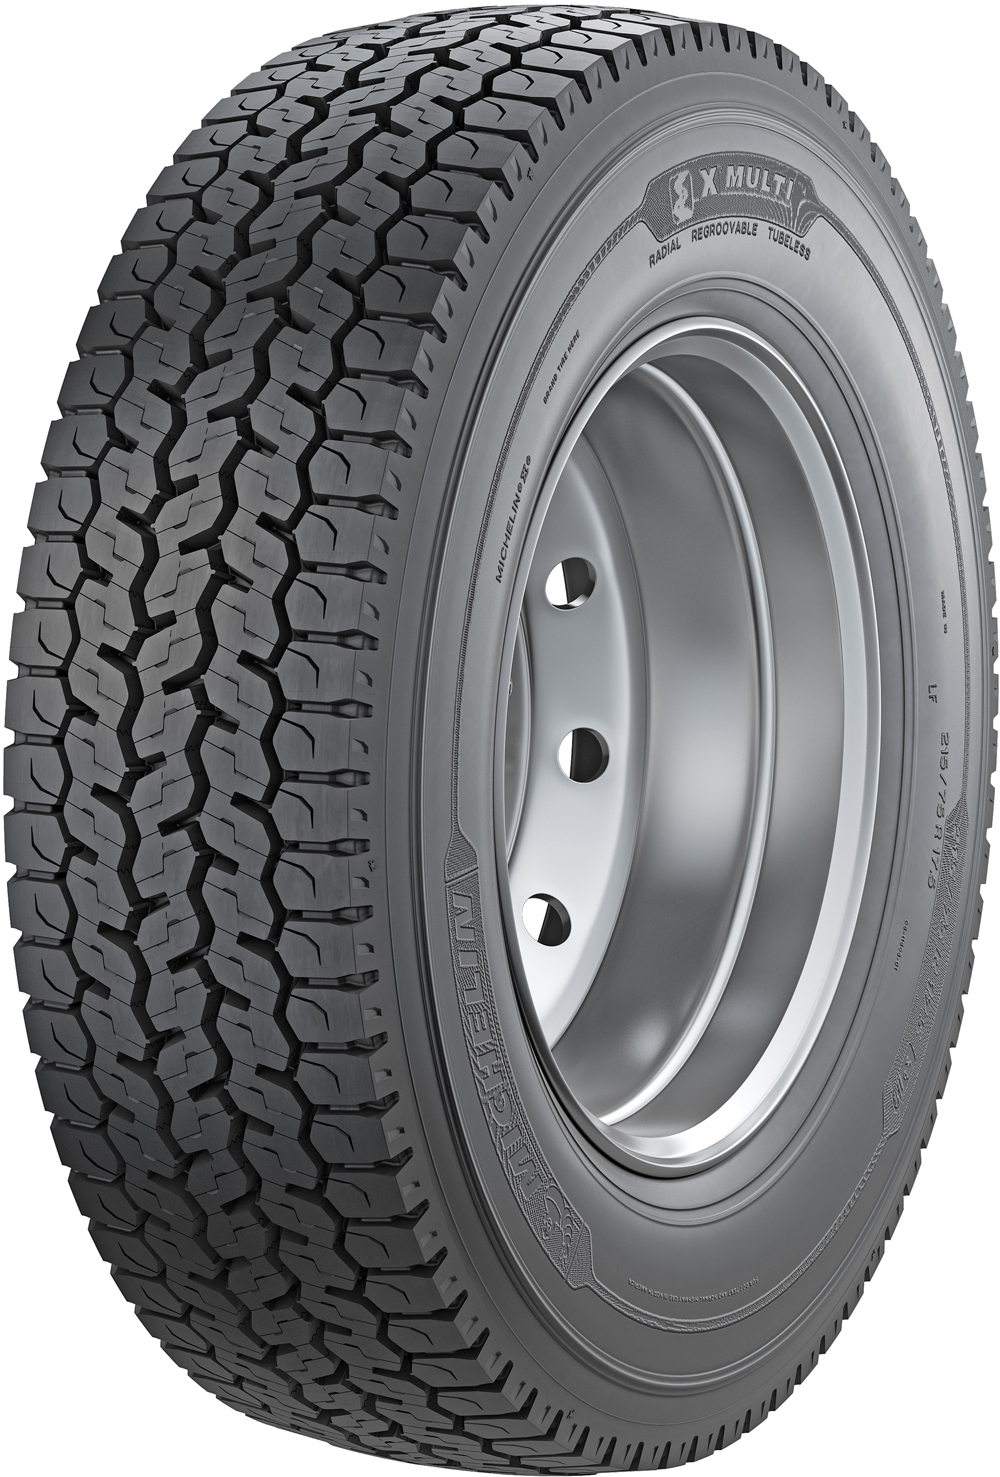 product_type-heavy_tires MICHELIN X MULTI D VG 315/70 R22.5 154L